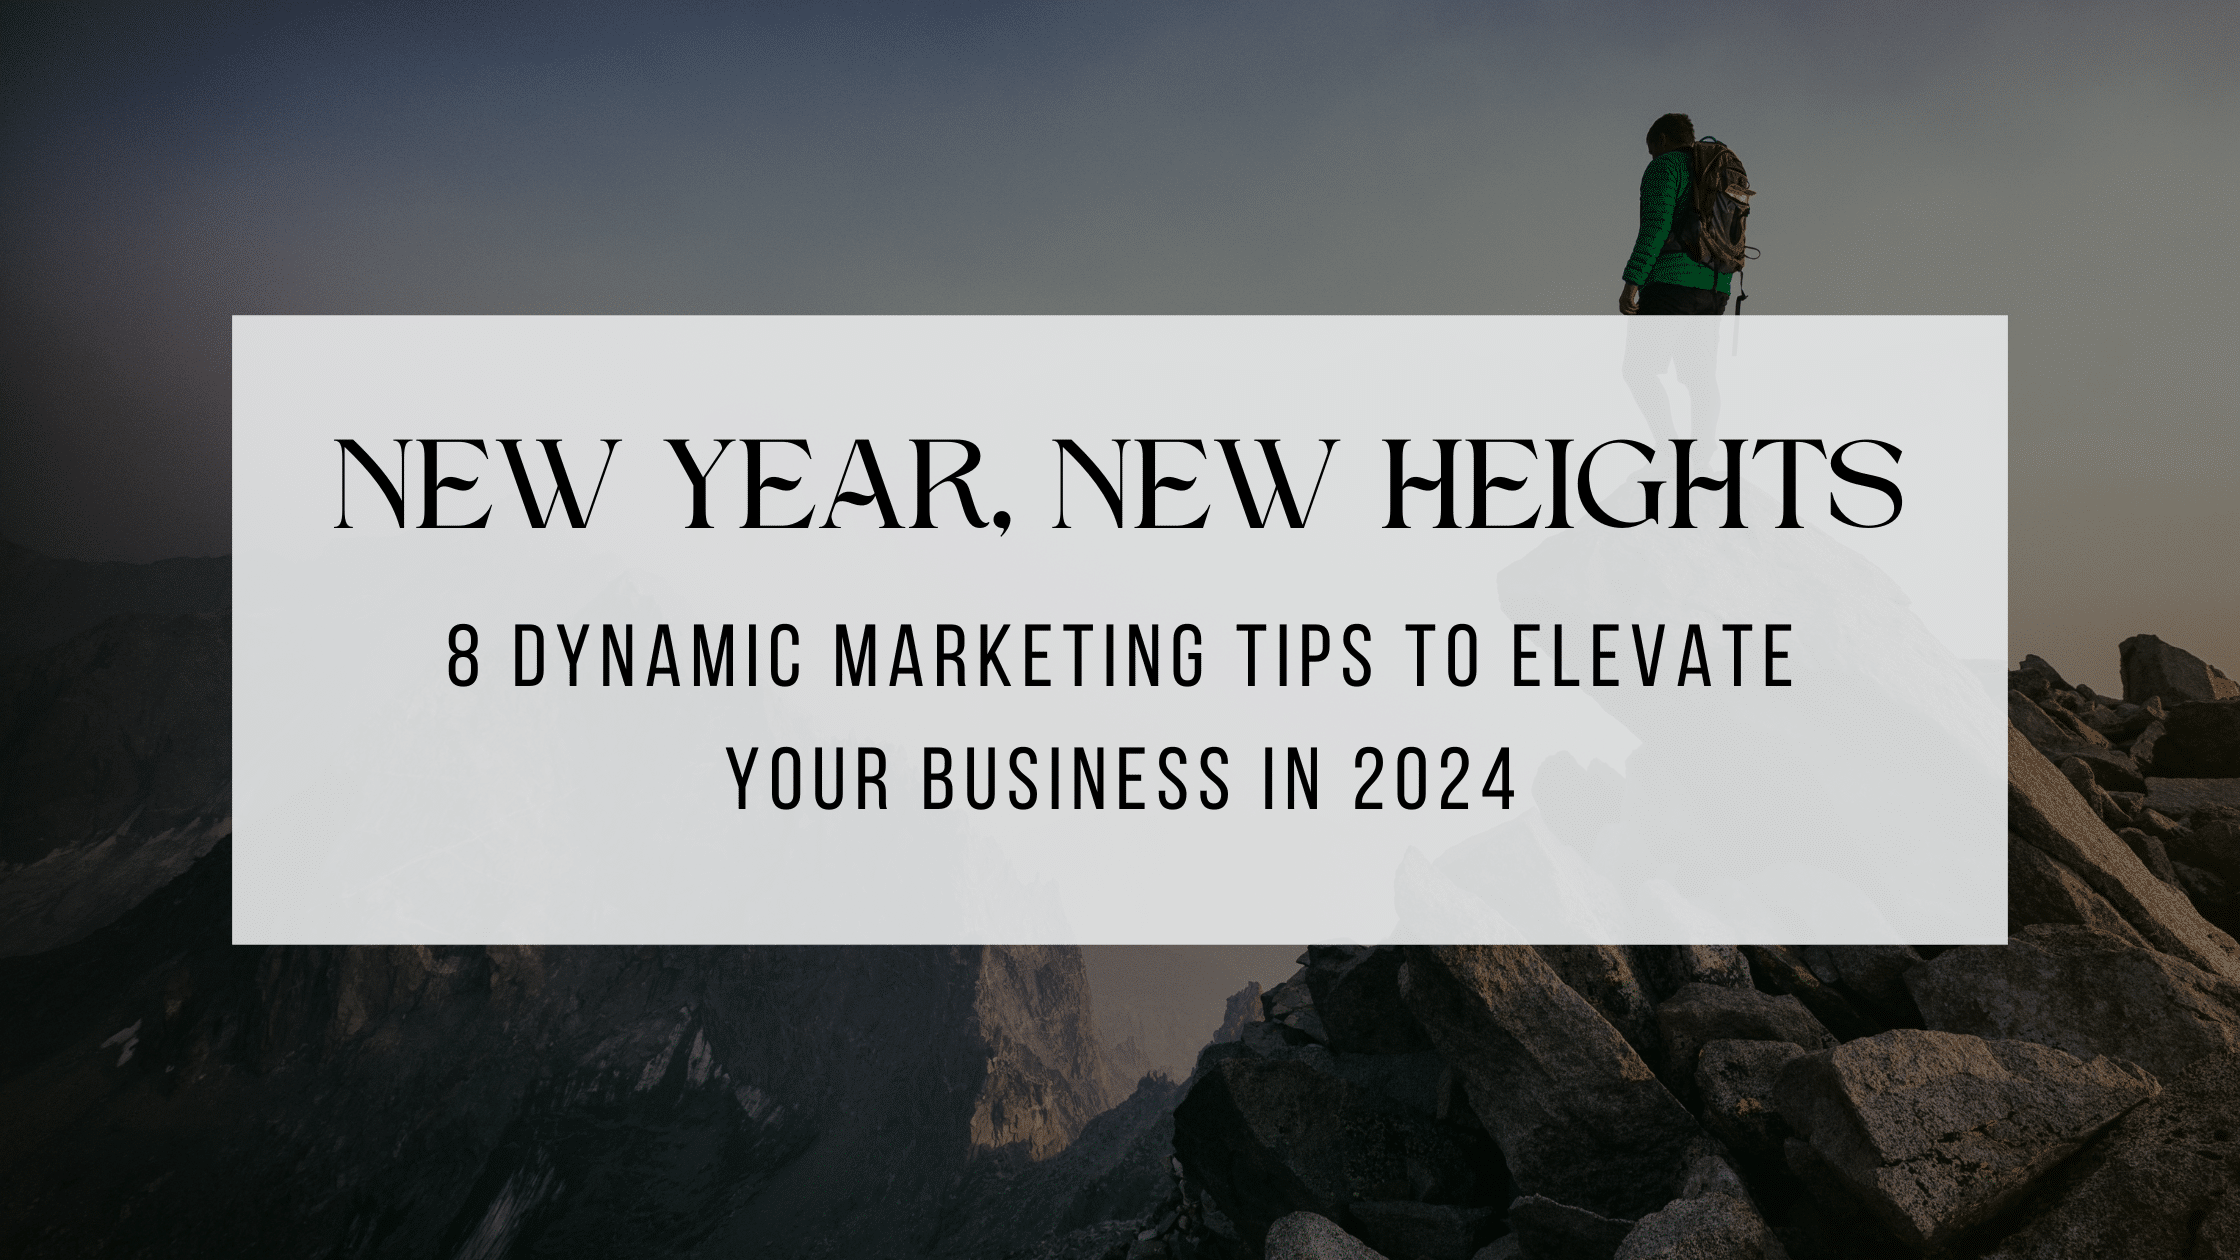 Featured image for “New Year, New Heights: 8 Dynamic Marketing Tips to Elevate Your Business in 2024”